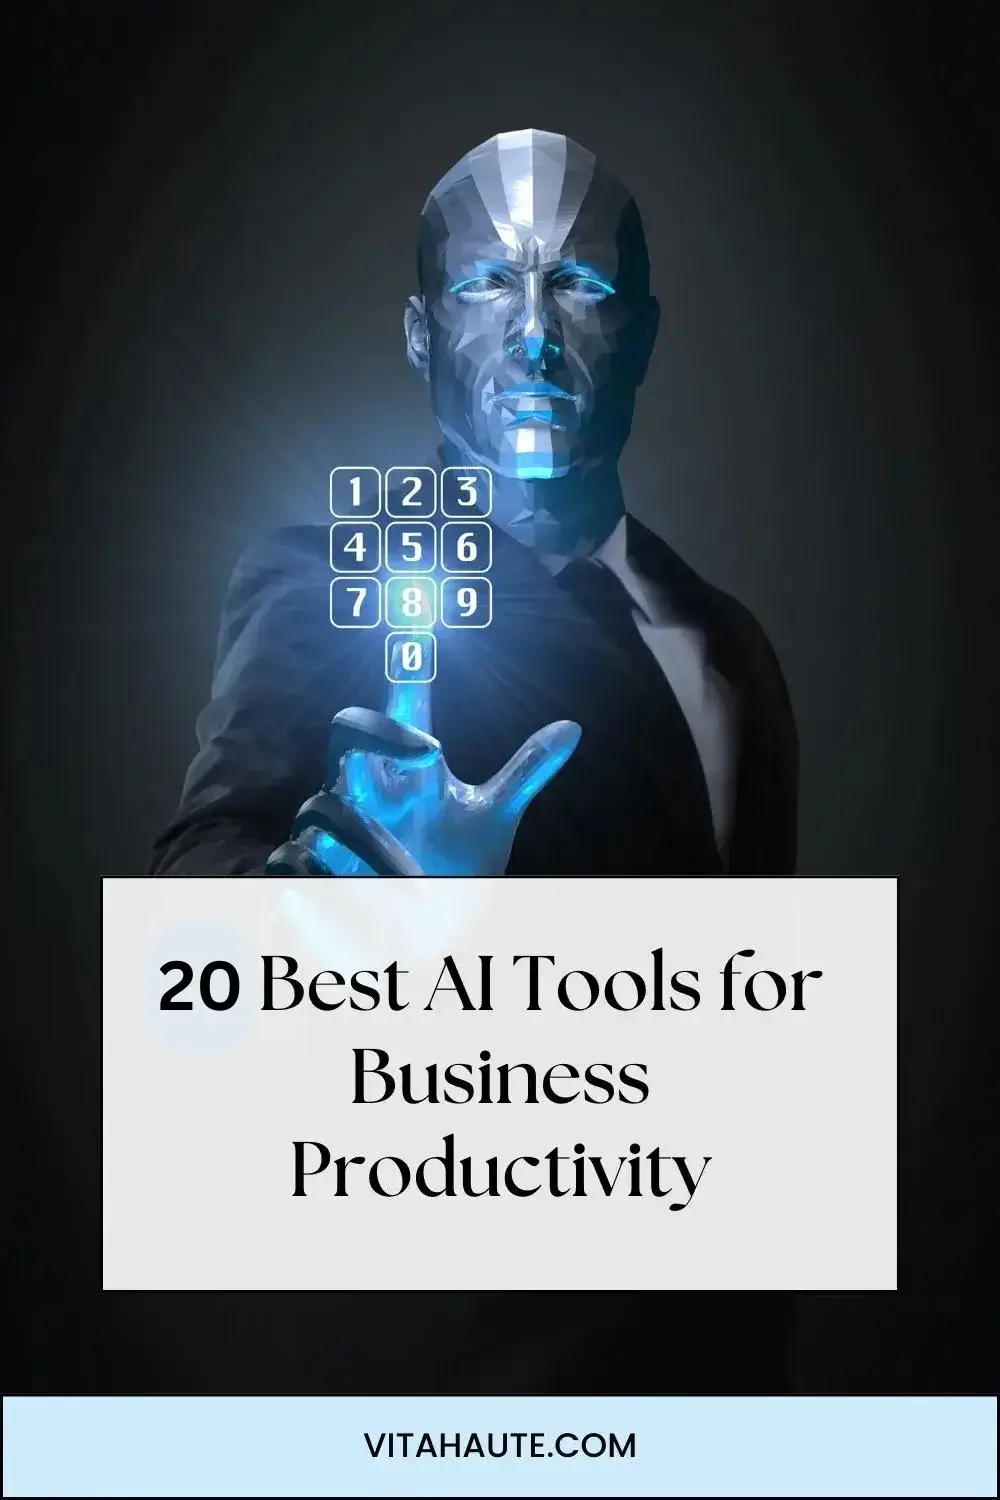 A list of AI tools for business productivity